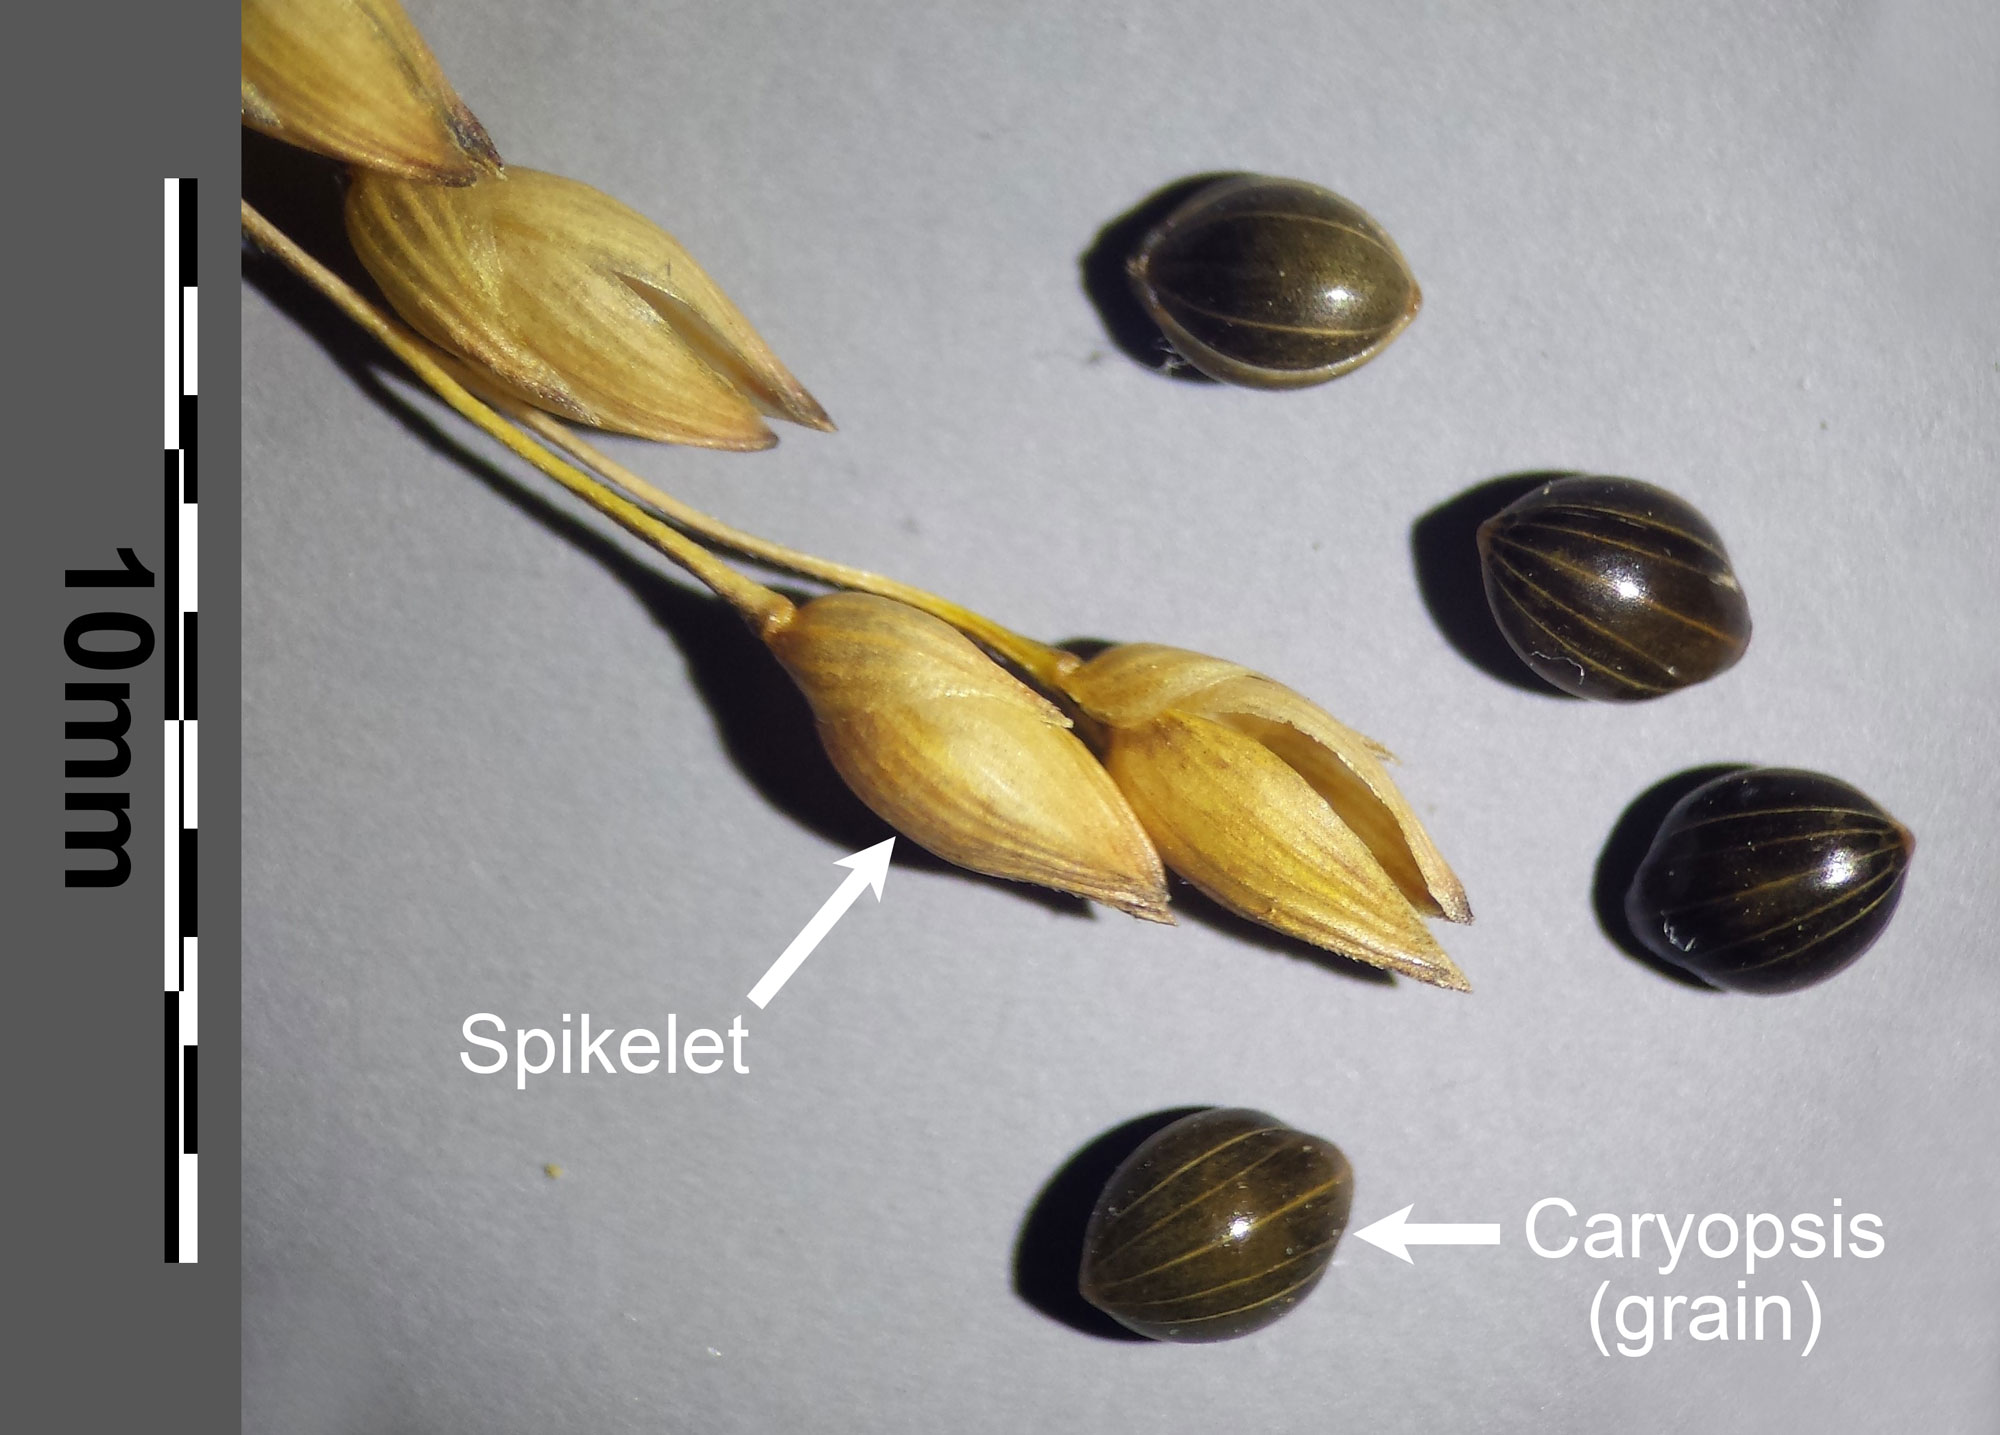 Photograph of broomcorn millet spikelets and caryopses on a white background. The photo shows several spikelets attached to an axis with caryopses laying nearby. The caryopses are shiny and black with vertical stripes. Scale bar is 10 millimeters.